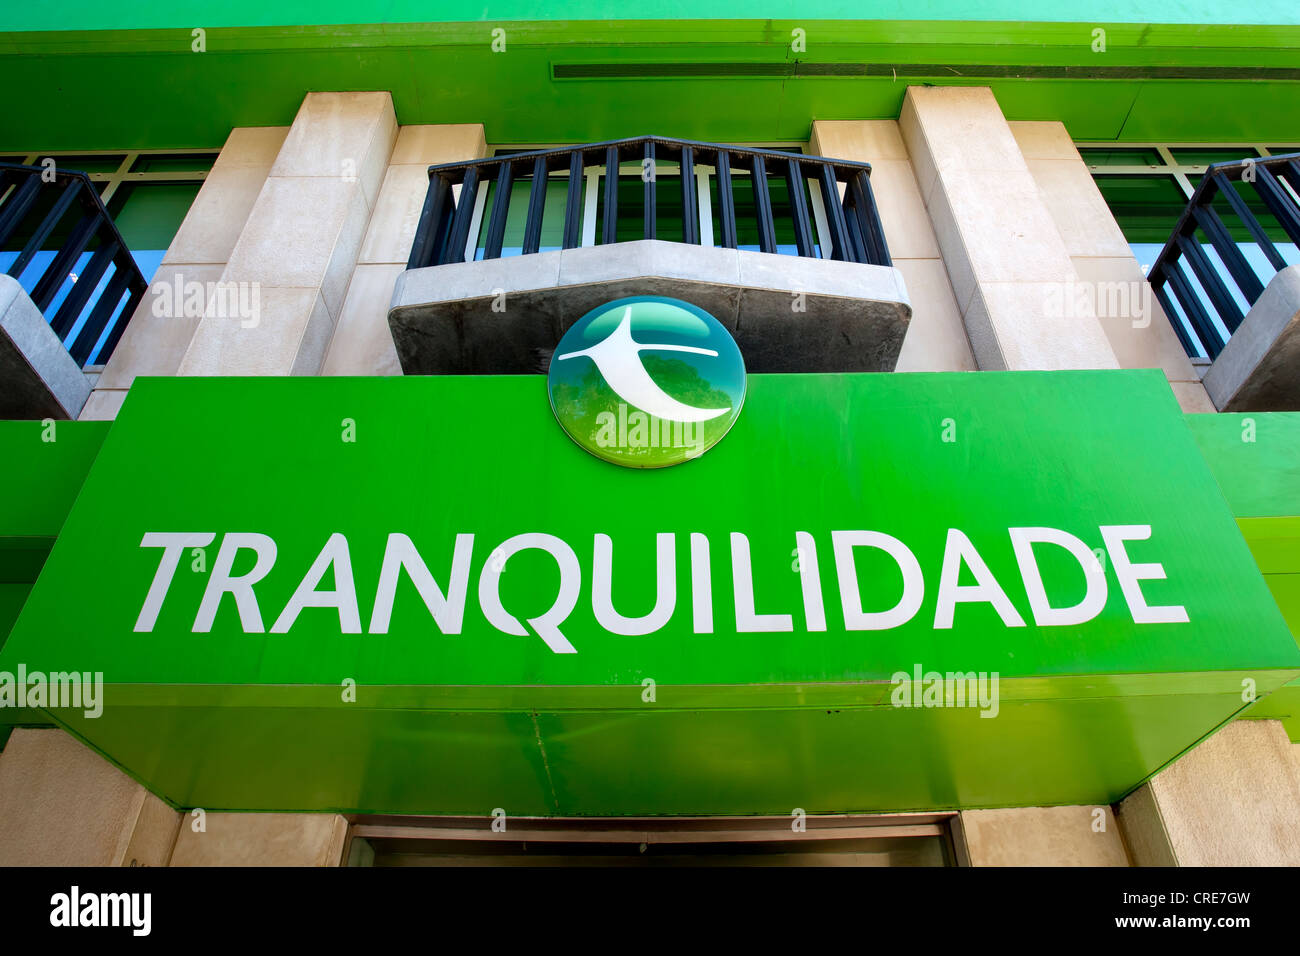 Headquarters of the largest insurance company in Portugal, Tranquilidade, Companhia de Seguros Tranquilidade belonging to the Stock Photo